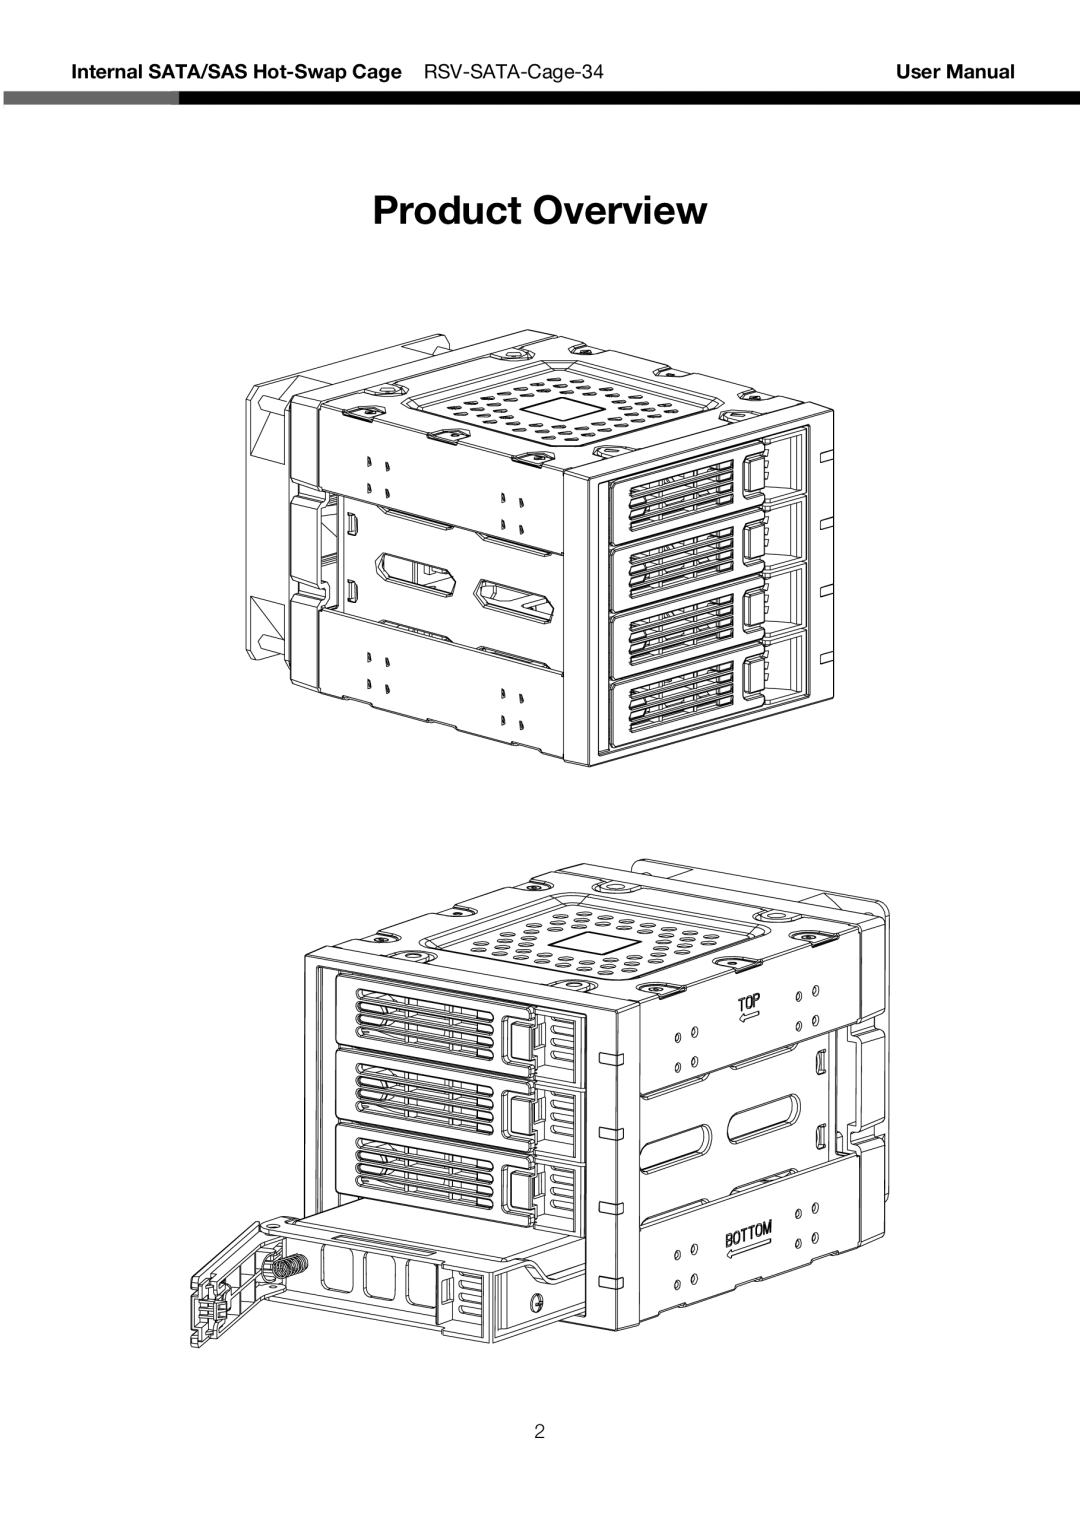 Rosewill user manual Product Overview, Internal SATA/SAS Hot-SwapCage RSV-SATA-Cage-34 